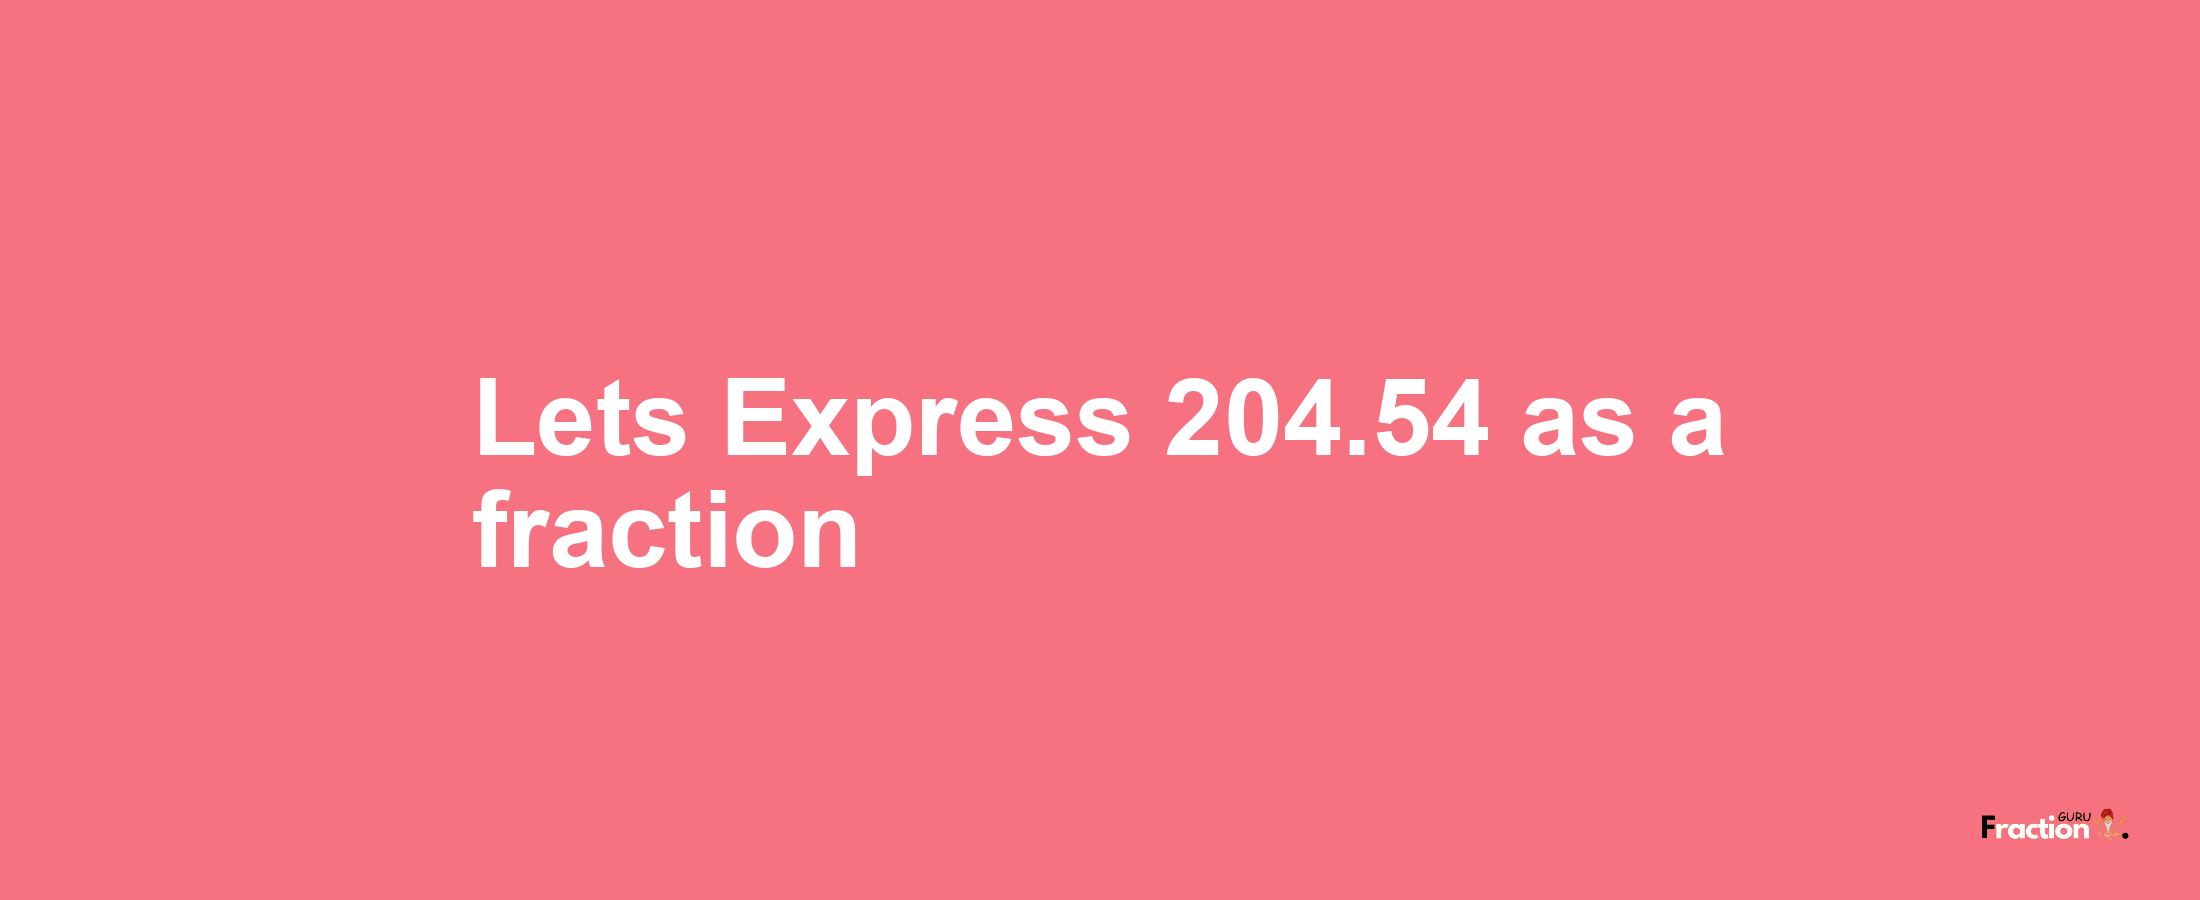 Lets Express 204.54 as afraction